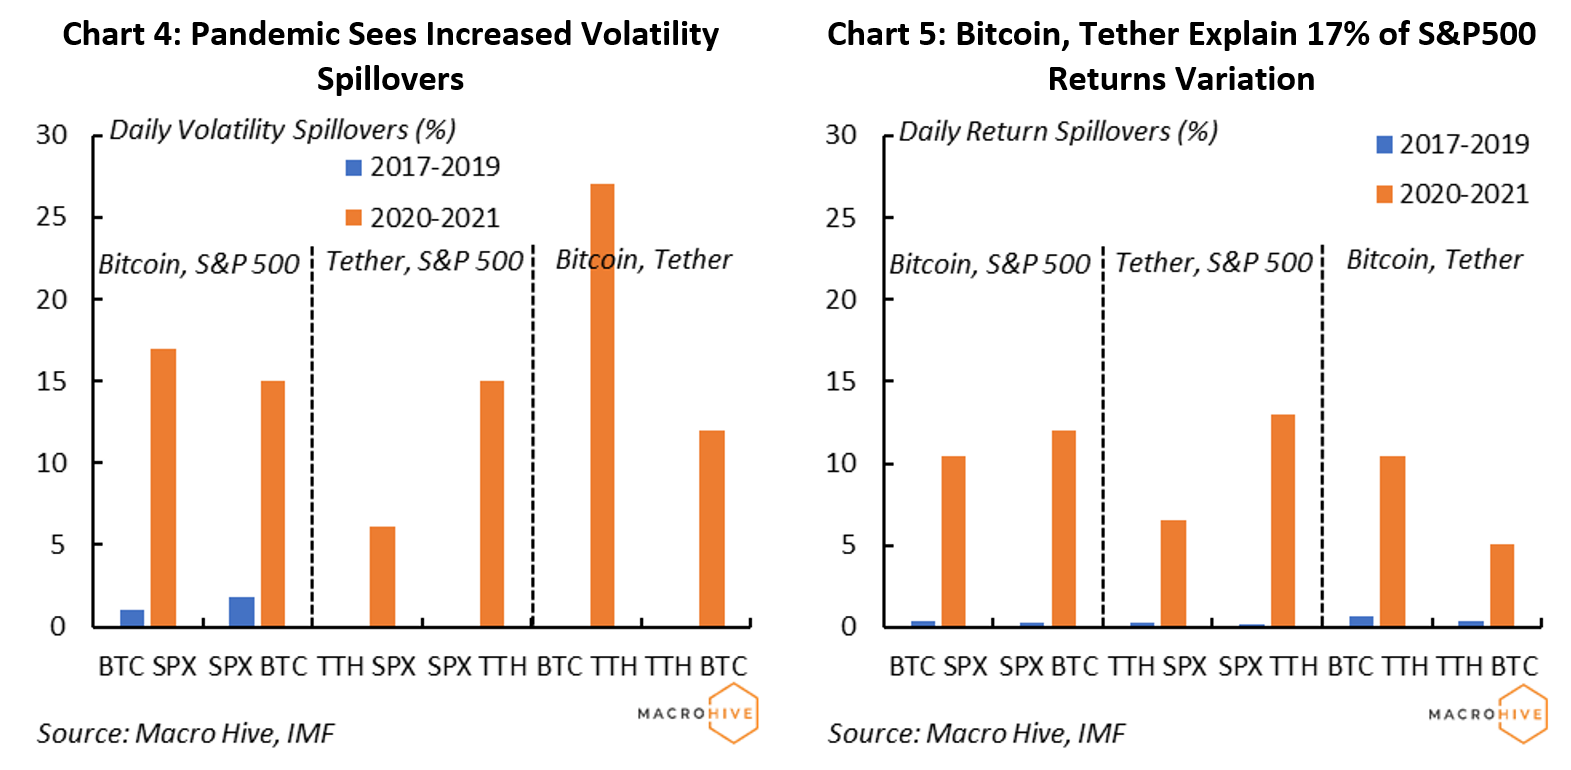 Chart 4: Pandemic Sees Increased Volatility Spillovers	Chart 5: Bitcoin, Tether Explain 17% of S&P500 Returns Variation